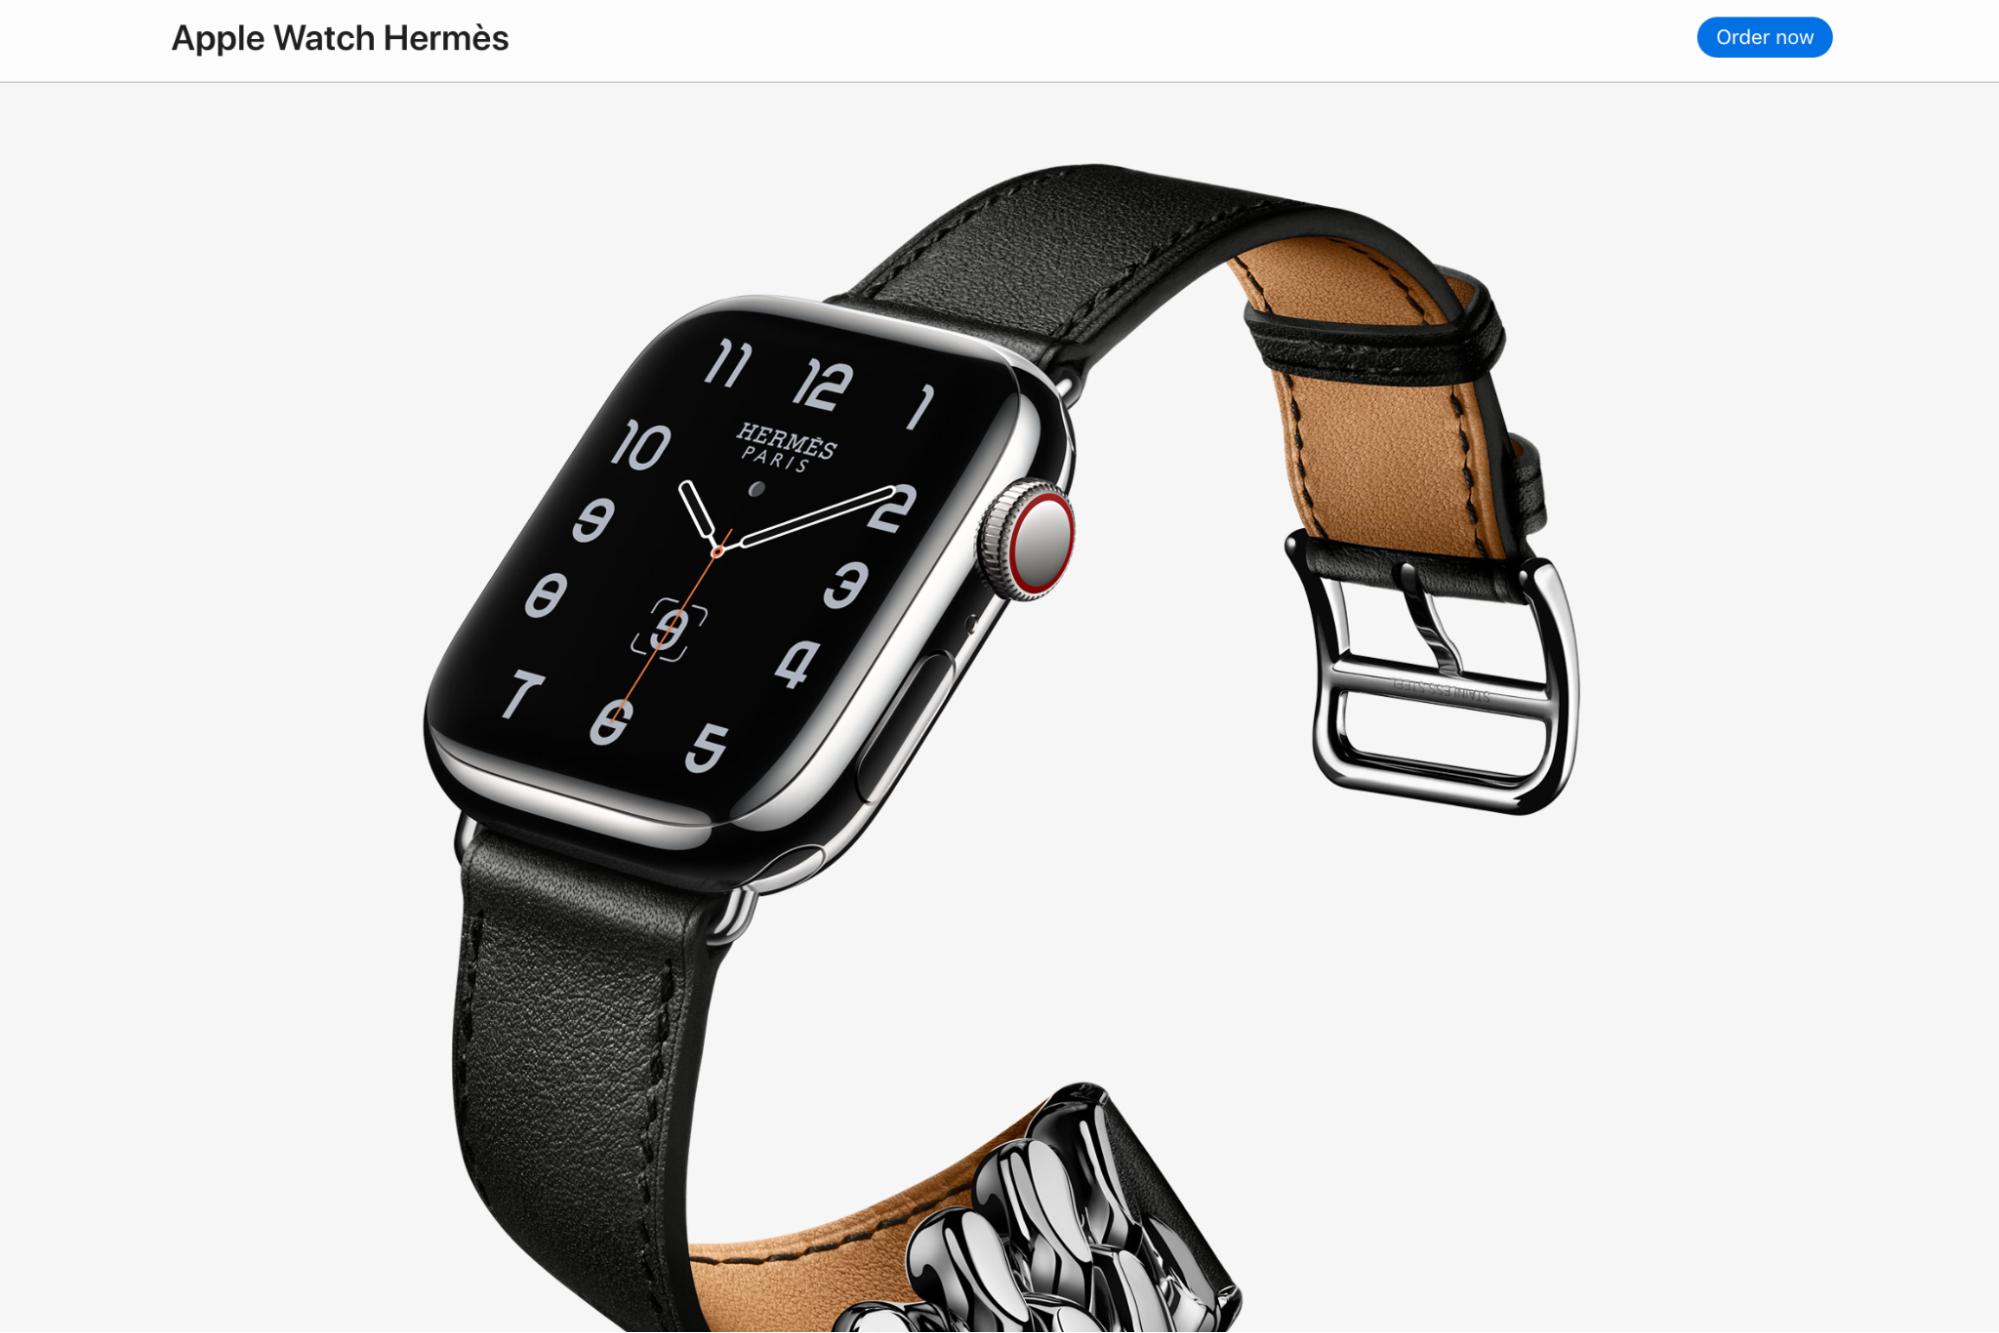 A photo of the Apple Watch Hermès in Apple’s online store, with a luxury black strap and co-branded watch face.